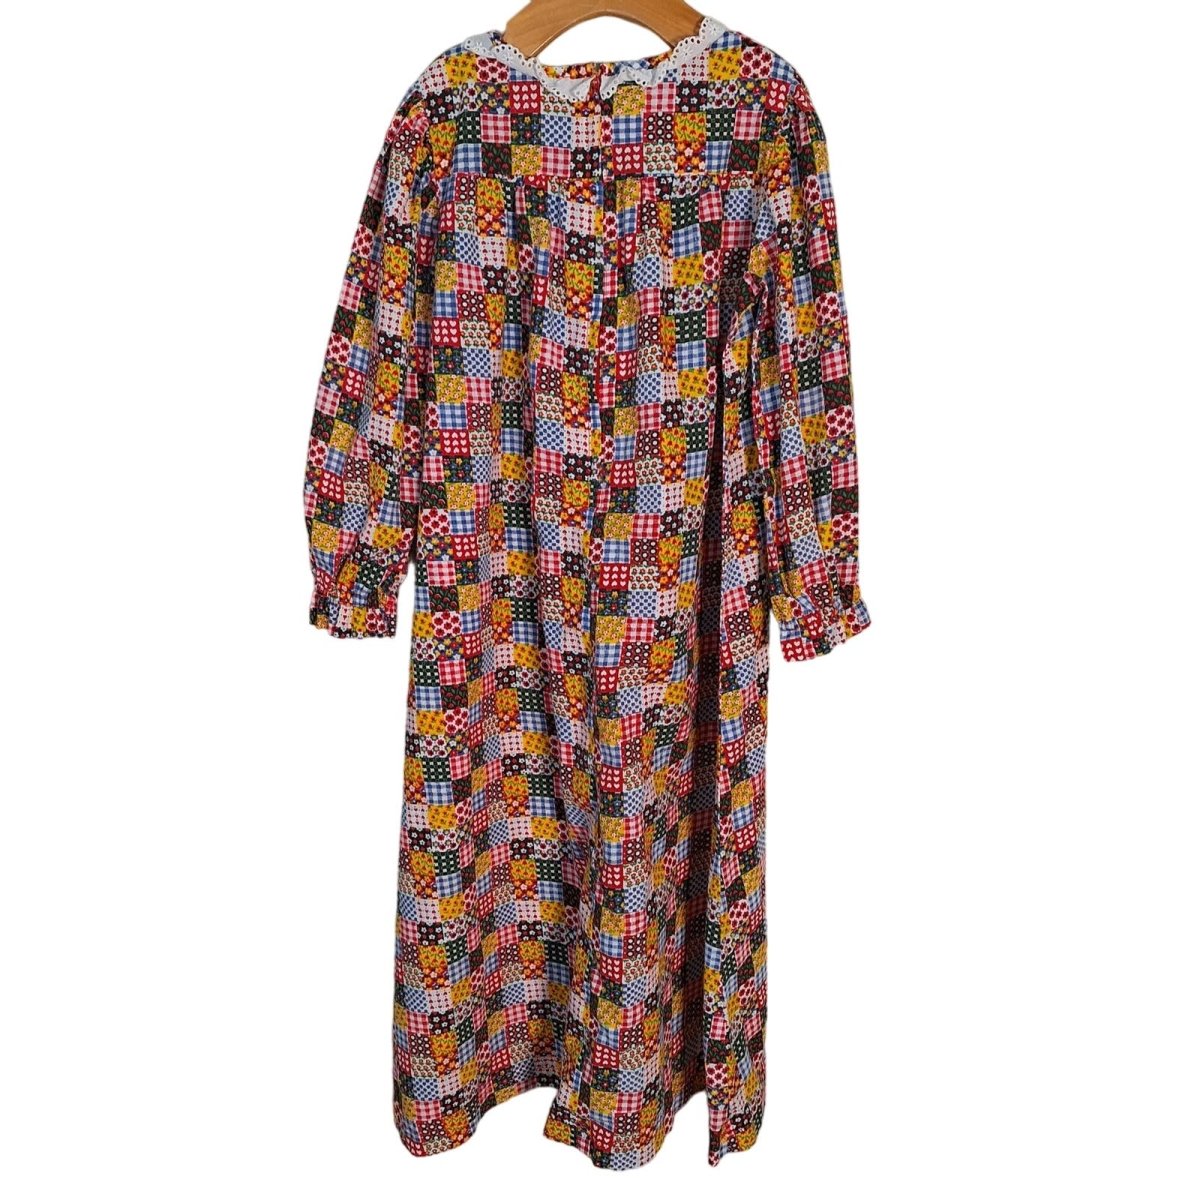 Vintage 70s Patchwork Print Prairie Maxi Dress Girls Size 6/8 Please See Measurements - themallvintage The Mall Vintage